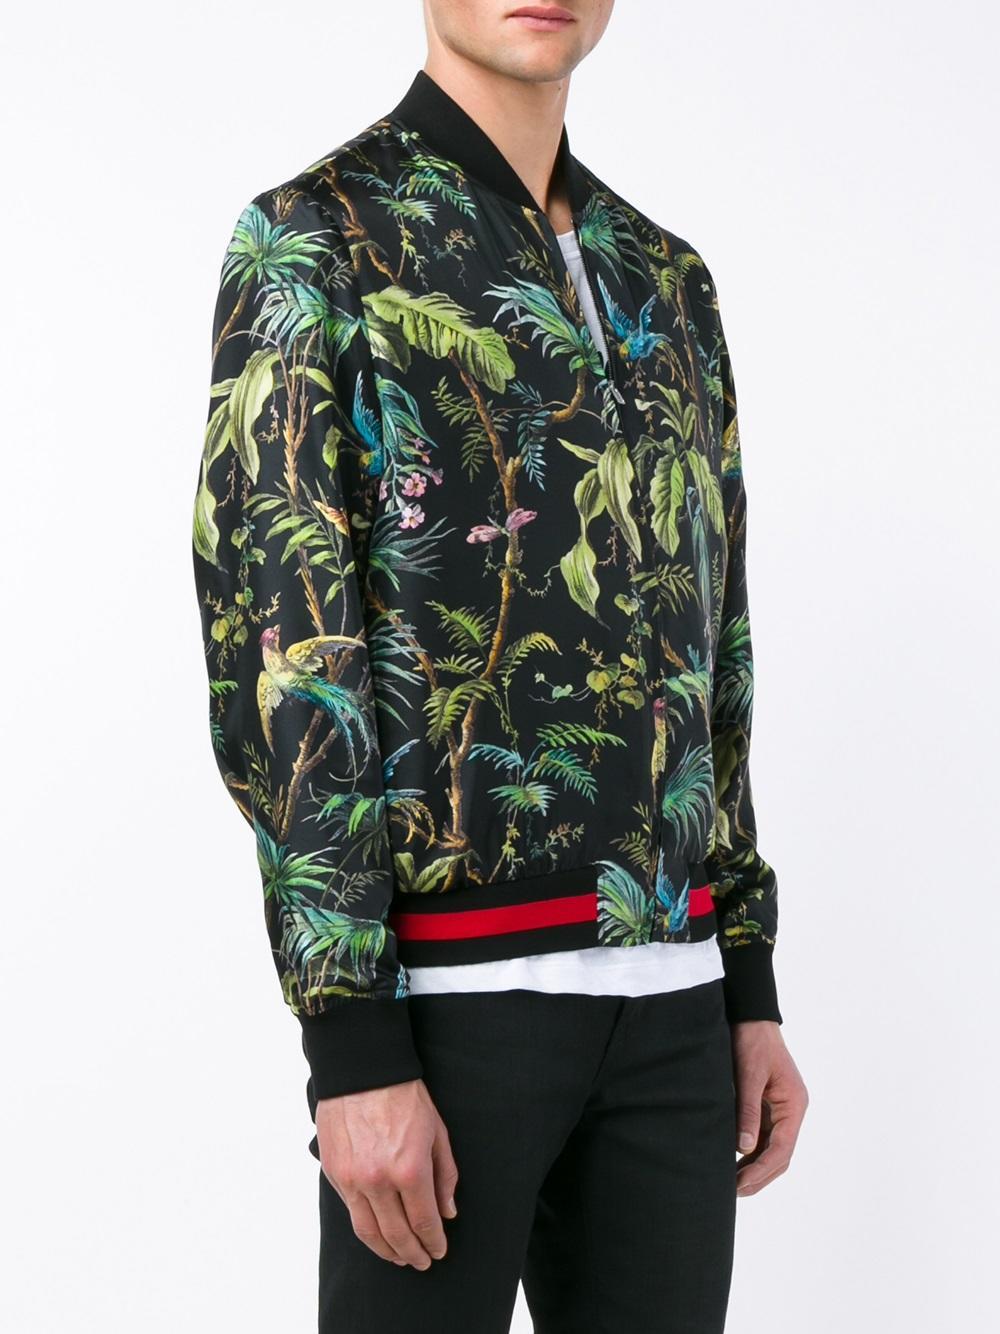 Lyst - Gucci Tropical Print Bomber Jacket in Black for Men